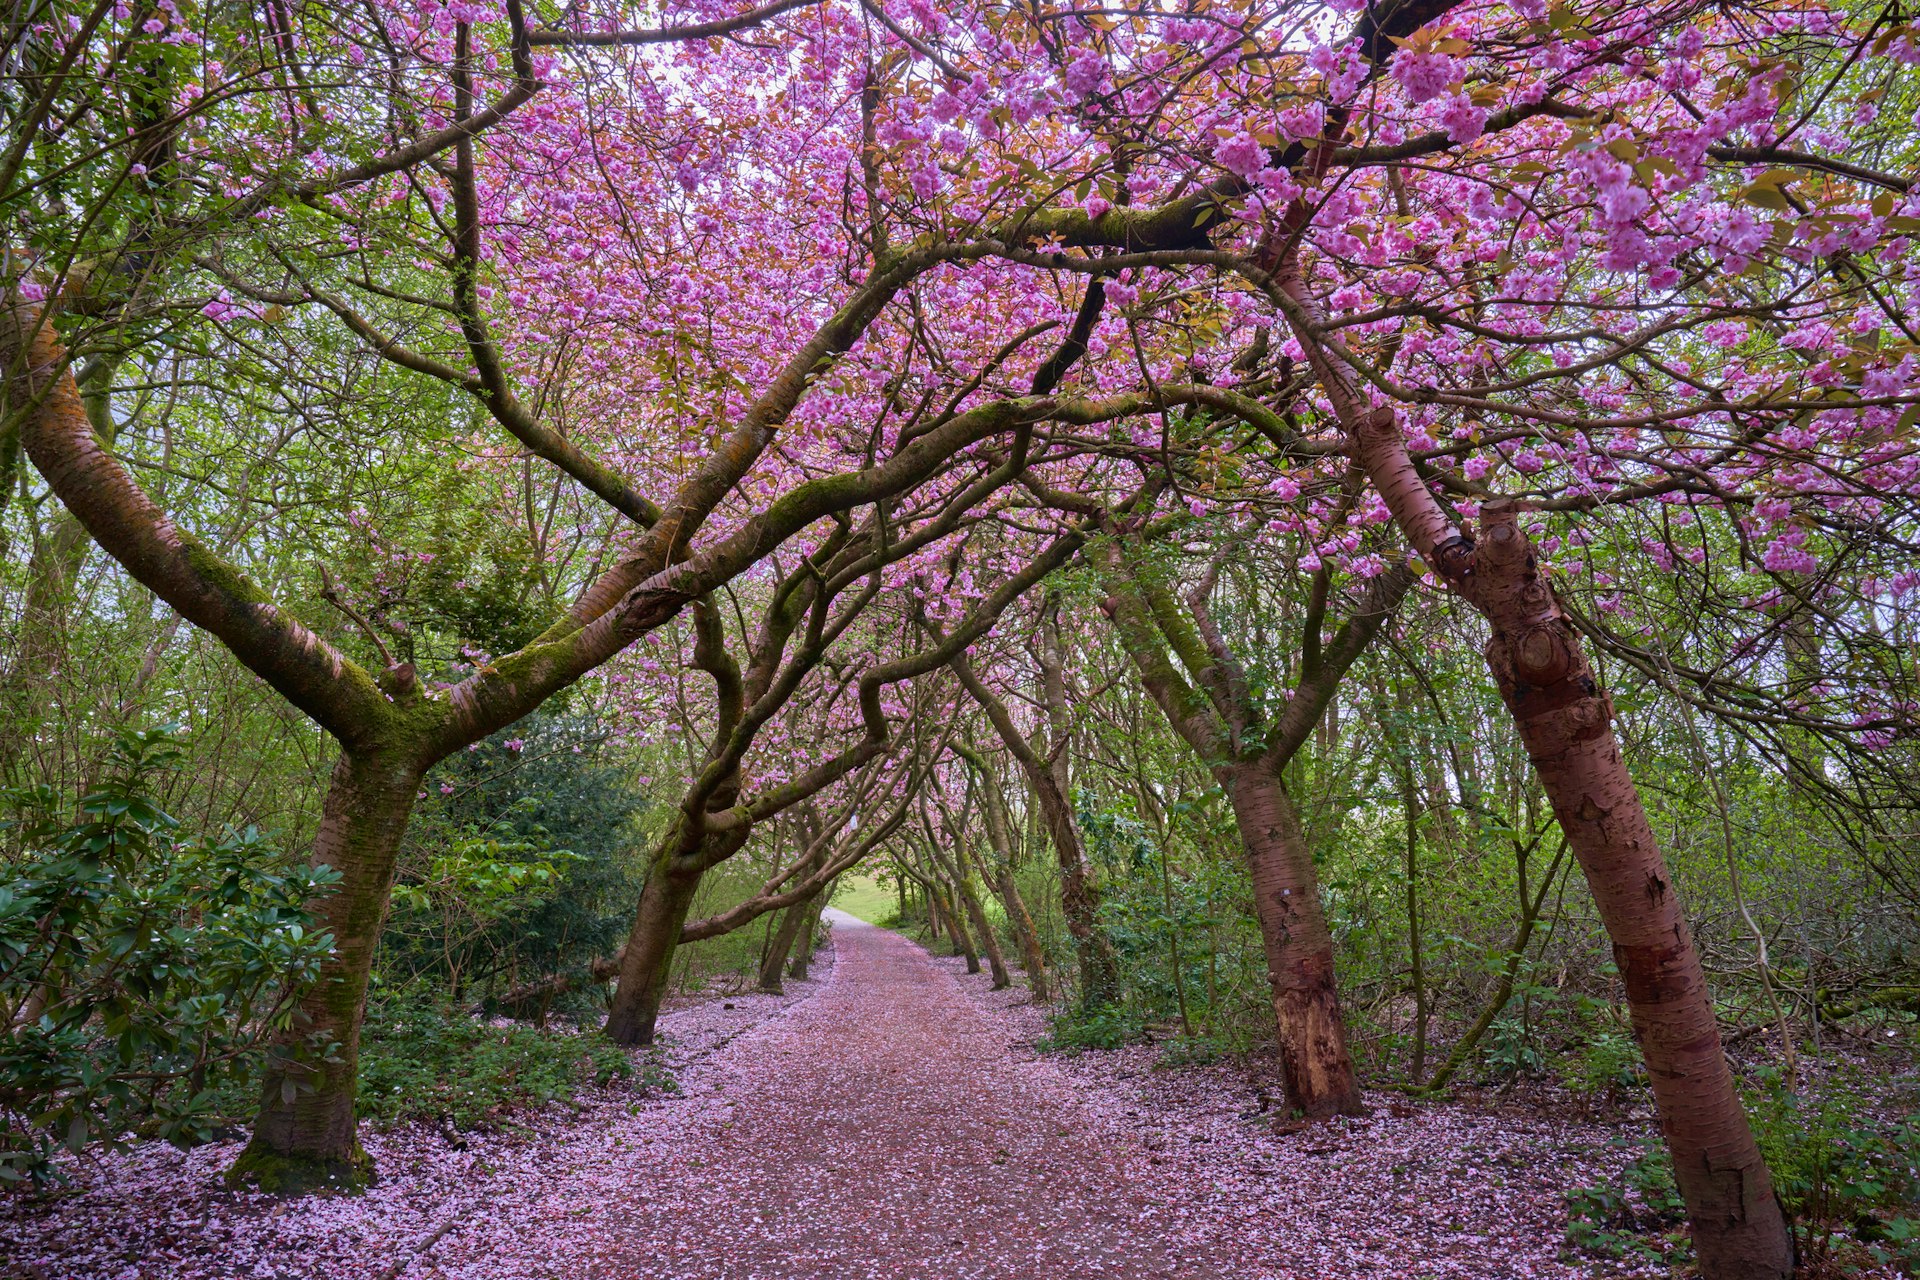 A path leading through blossom trees flowering with bright pink petals.